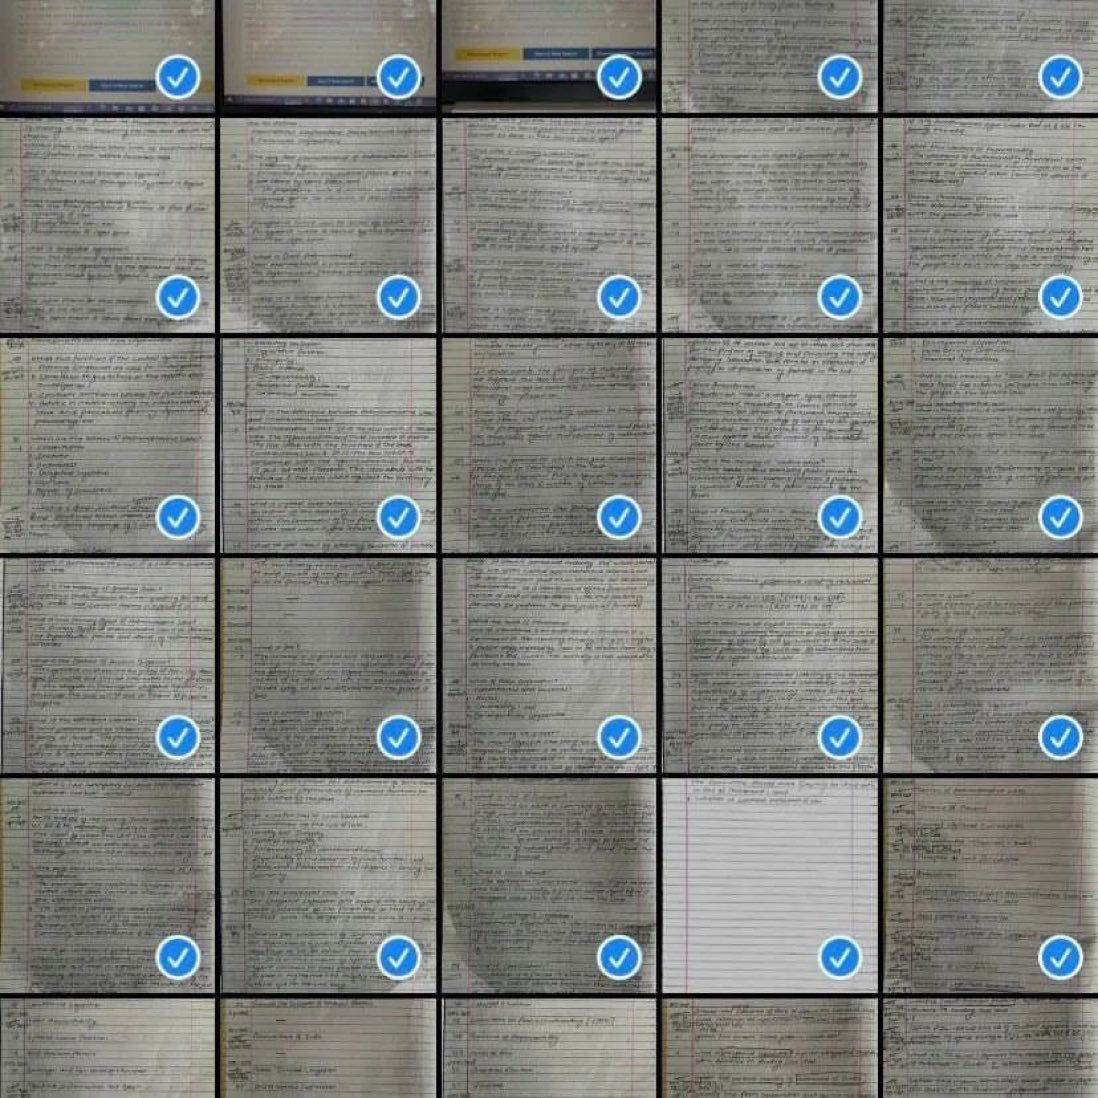 deleting notes & pdfs are so satisfying